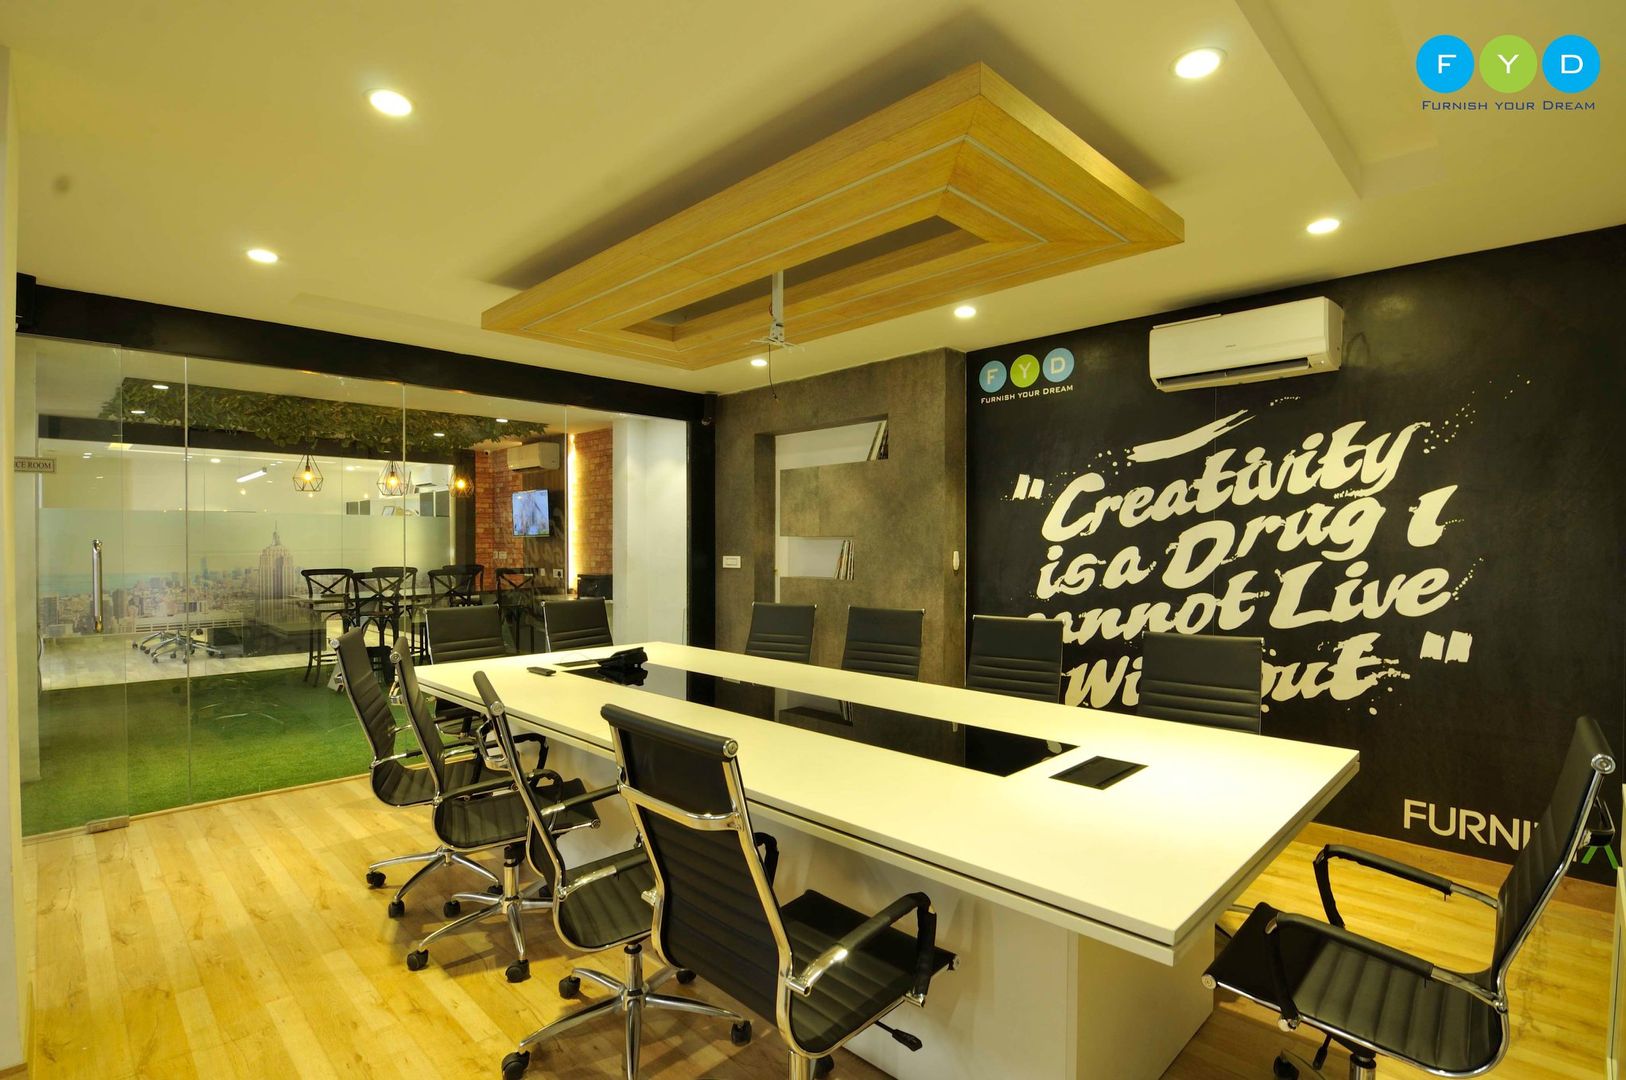 Let's Work - Coworking space in Noida FYD Interiors Pvt. Ltd Commercial spaces Offices & stores